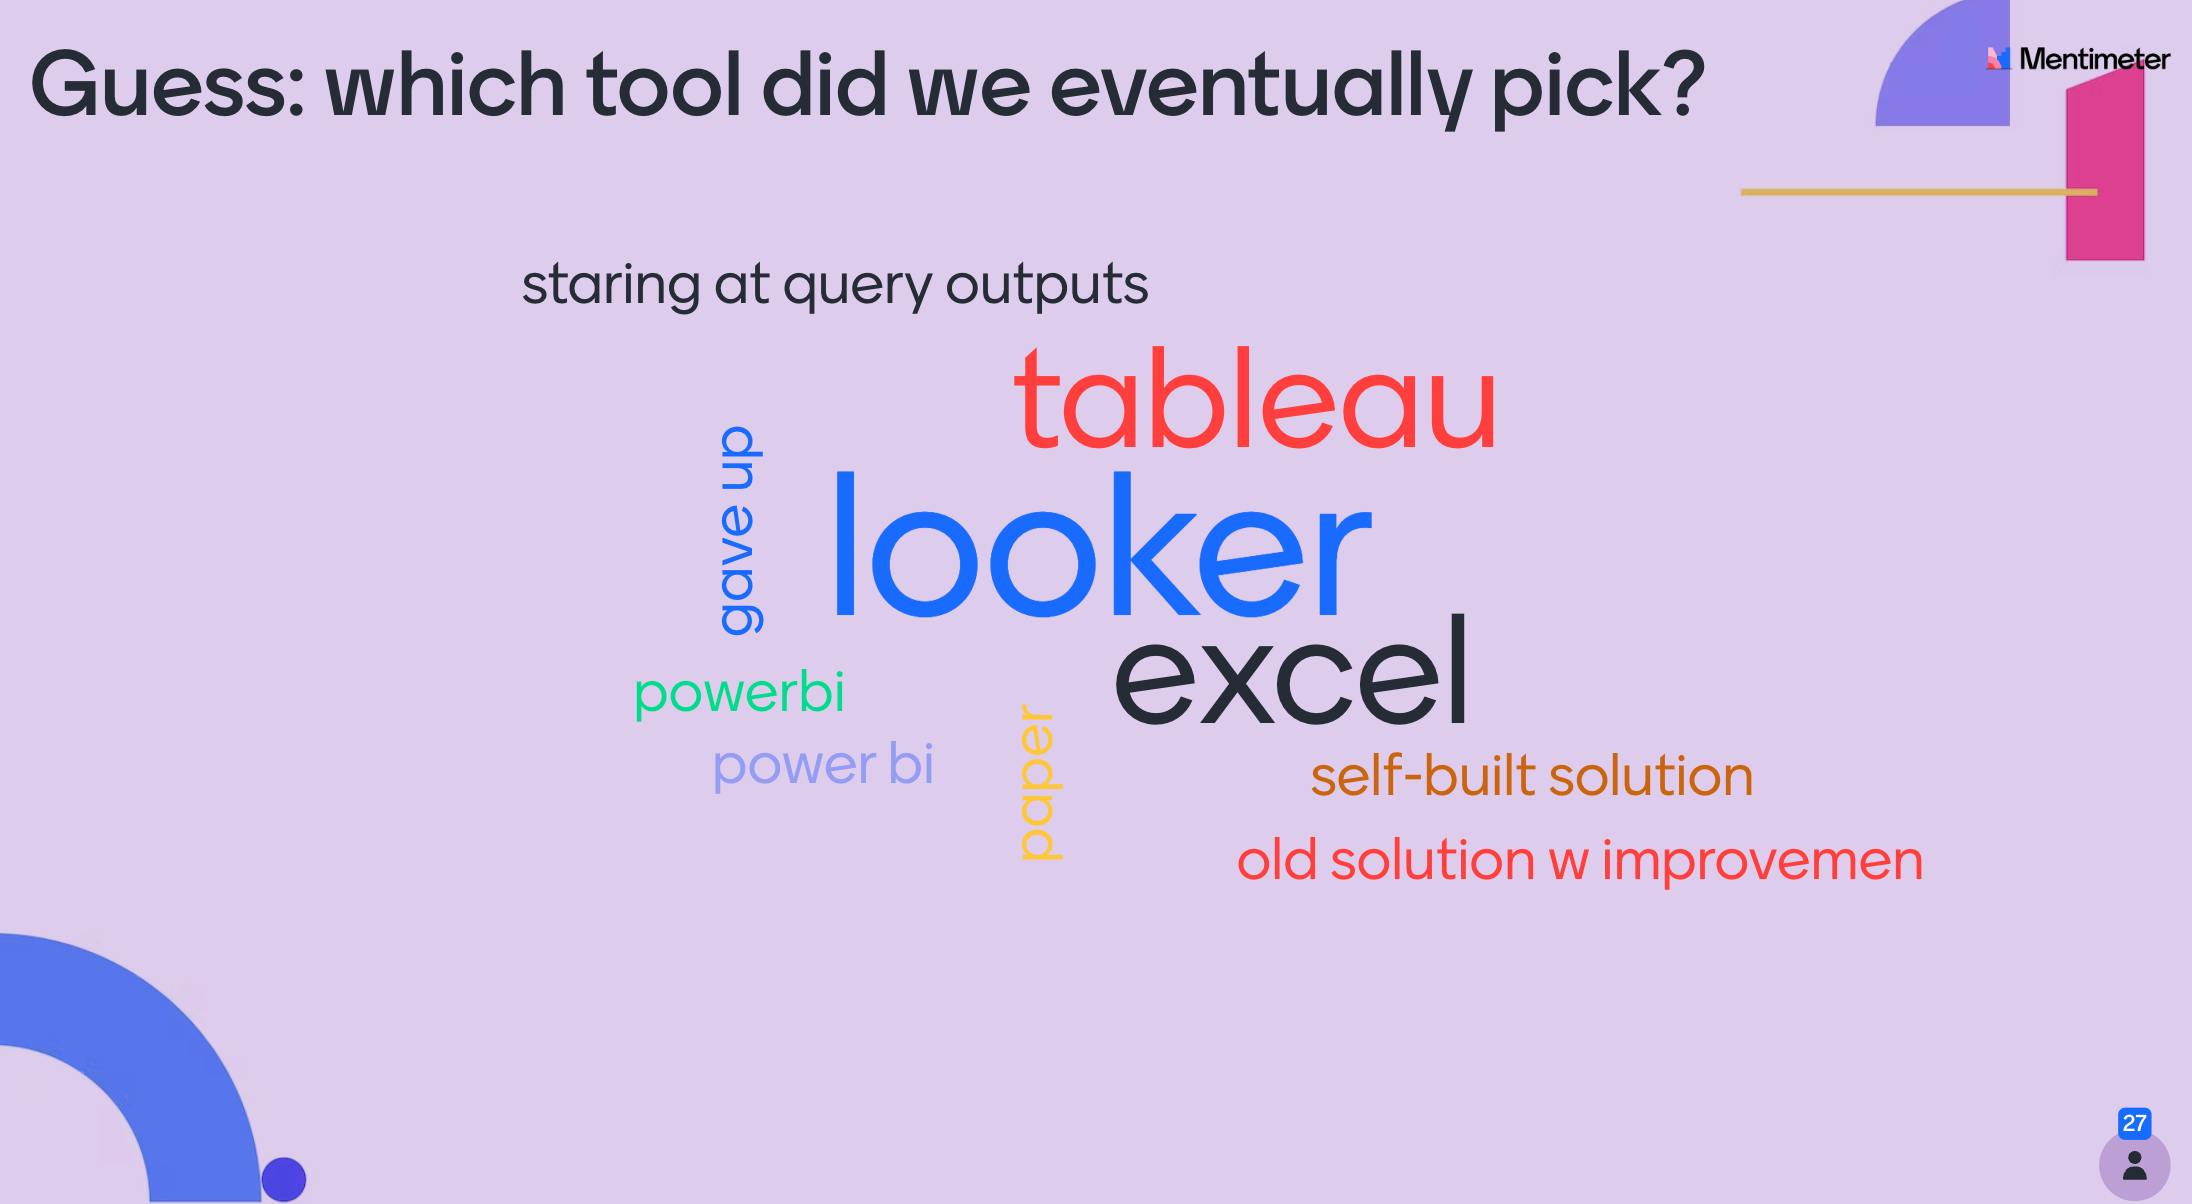 The audience’s answers to the question of what BI tool Mentimeter eventually chose—it might give a hint as to what the correct answer is.